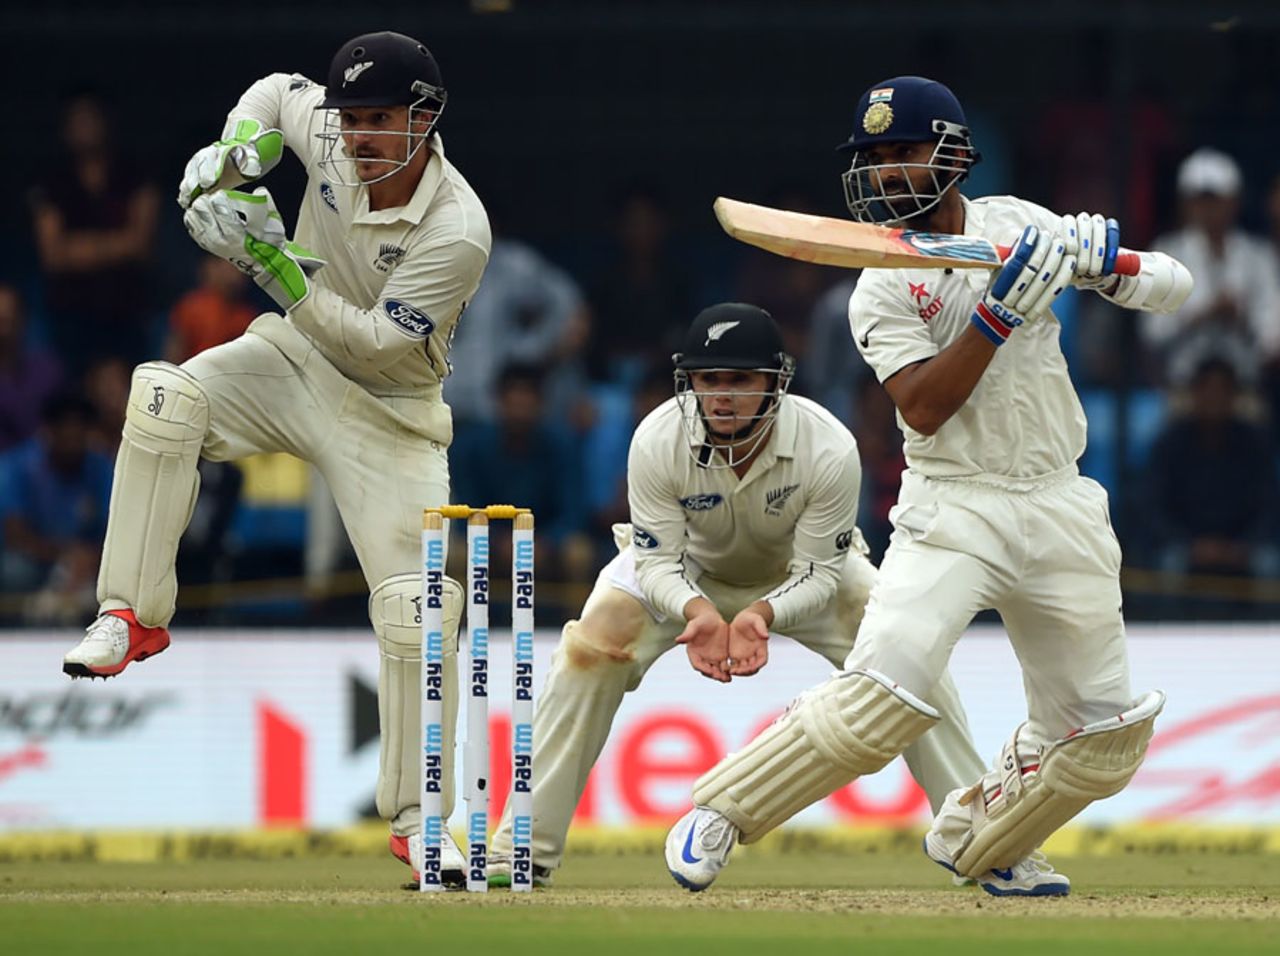 BJ Watling and Tom Latham look on as Ajinkya Rahane punches through the off side, India v New Zealand, 3rd Test, Indore, 1st day, October 8, 2016